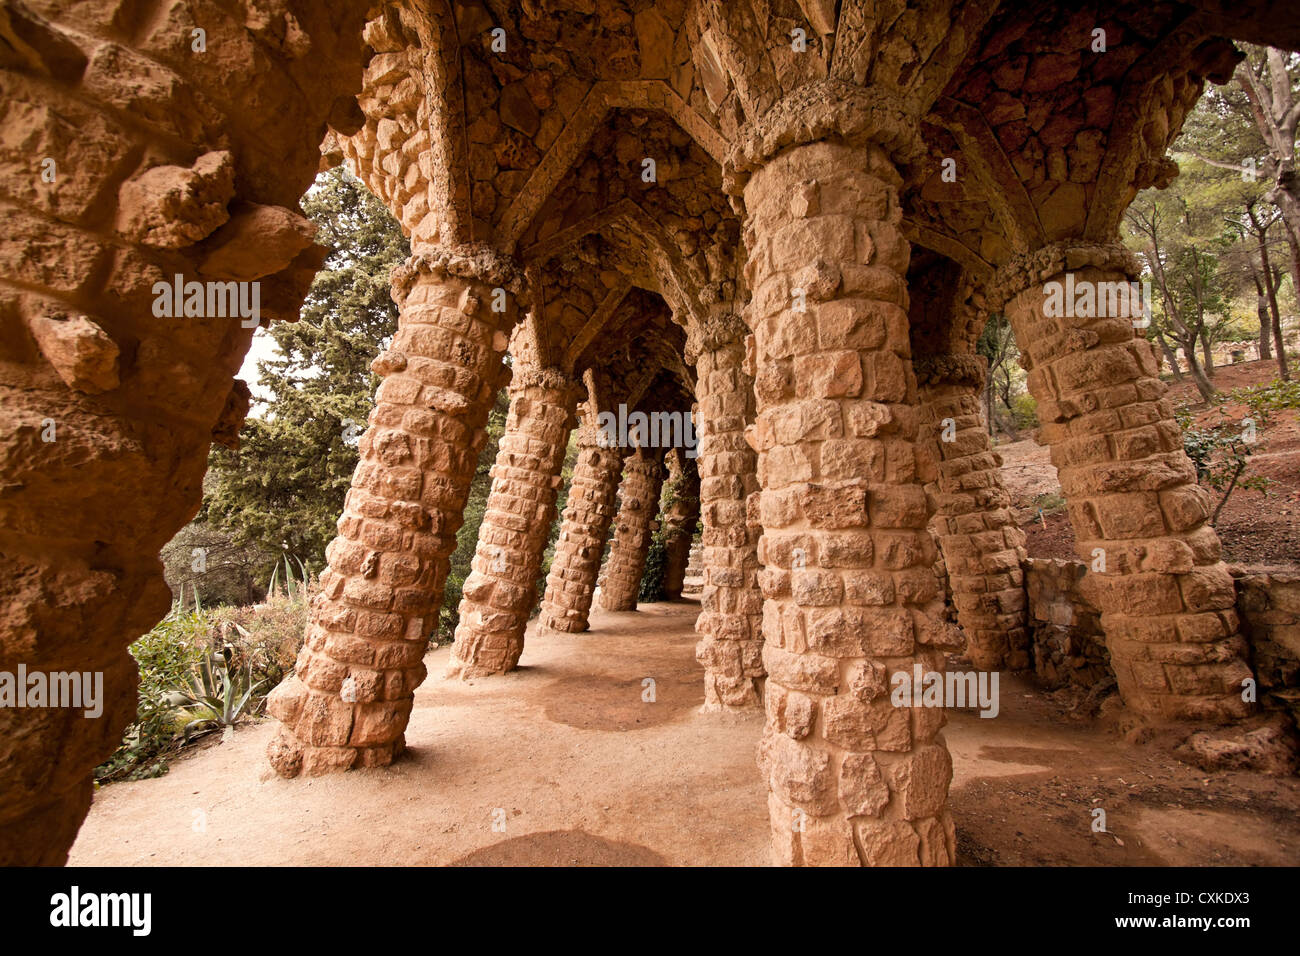 Spain - Barcelona - Parc Guell by Gaudi Stock Photo